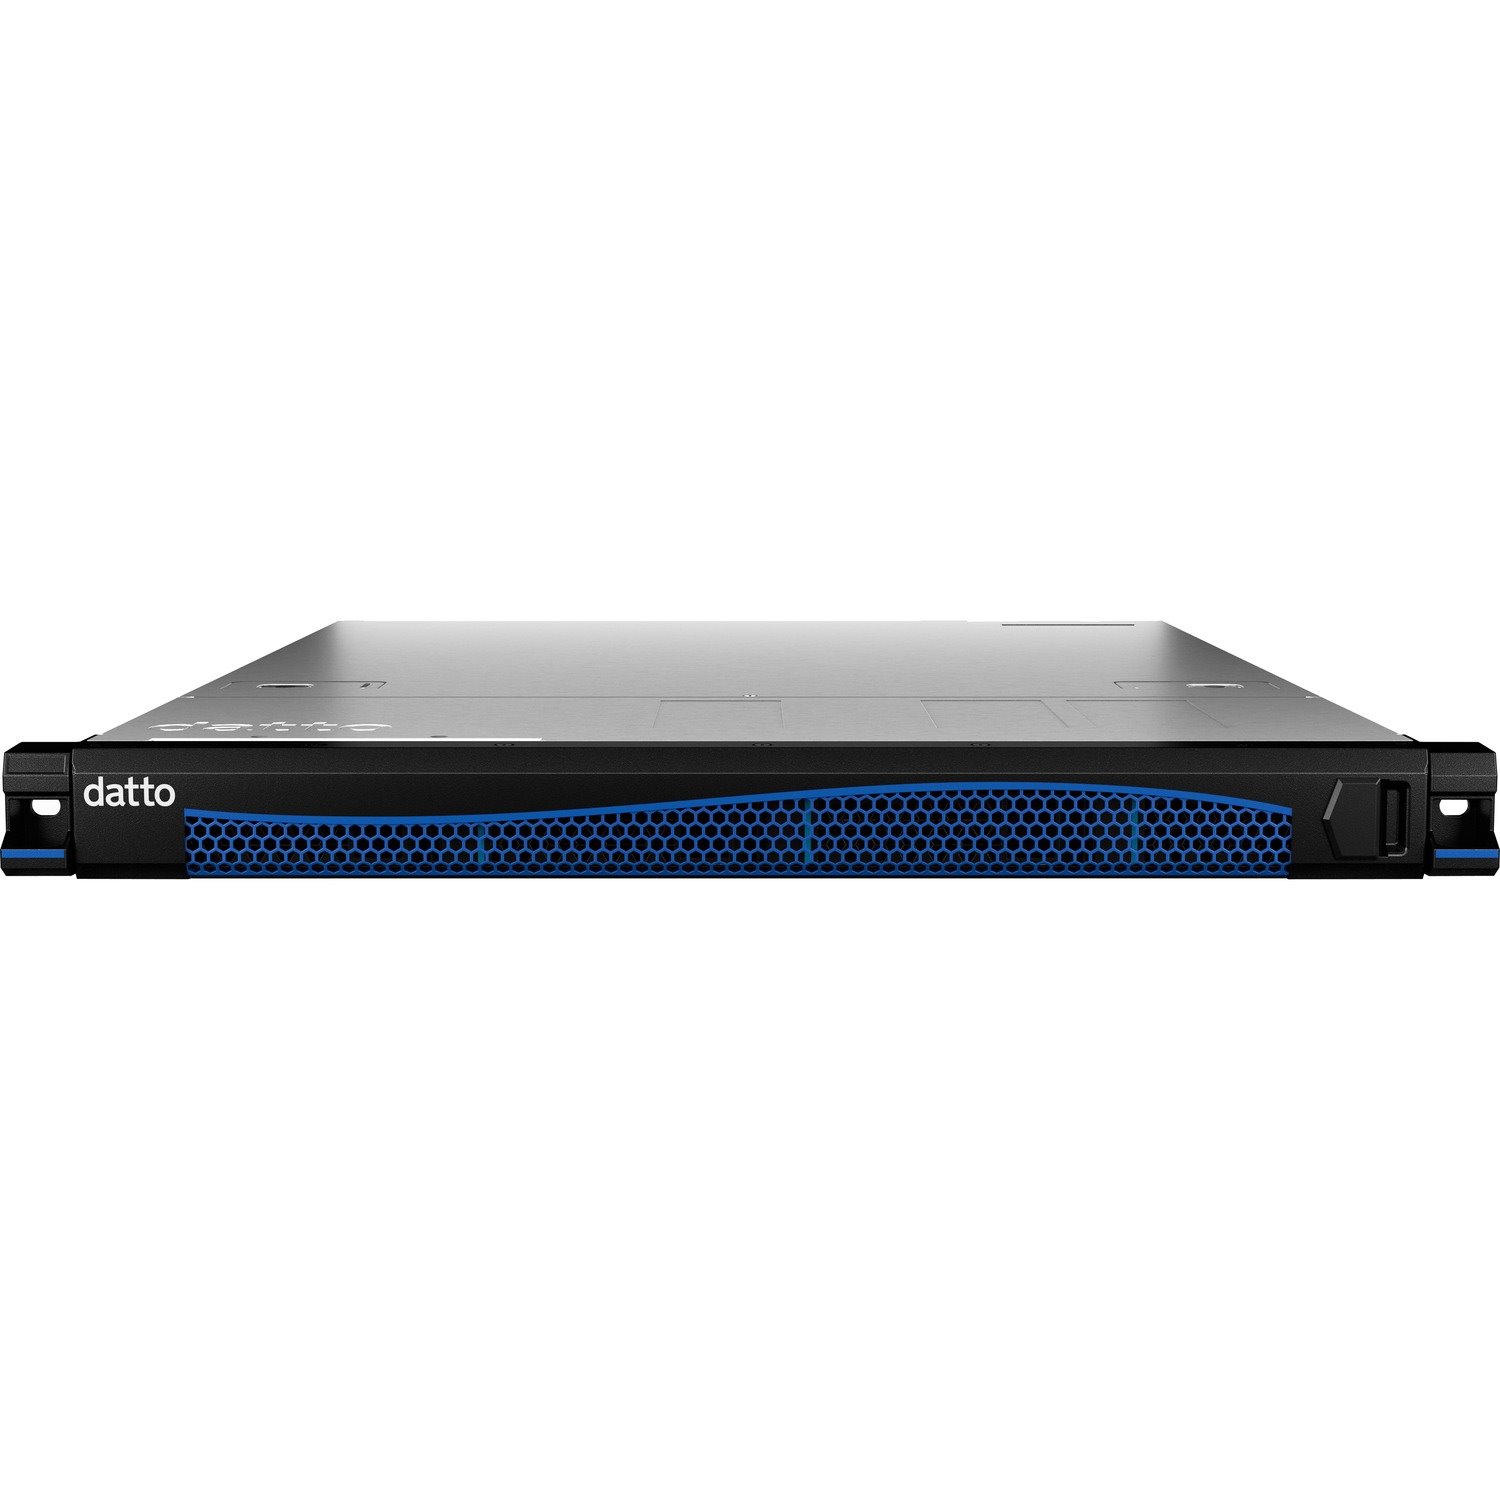 Datto Siris 4 P 10TB Backup, Continuity & Disaster Recovery Appliance